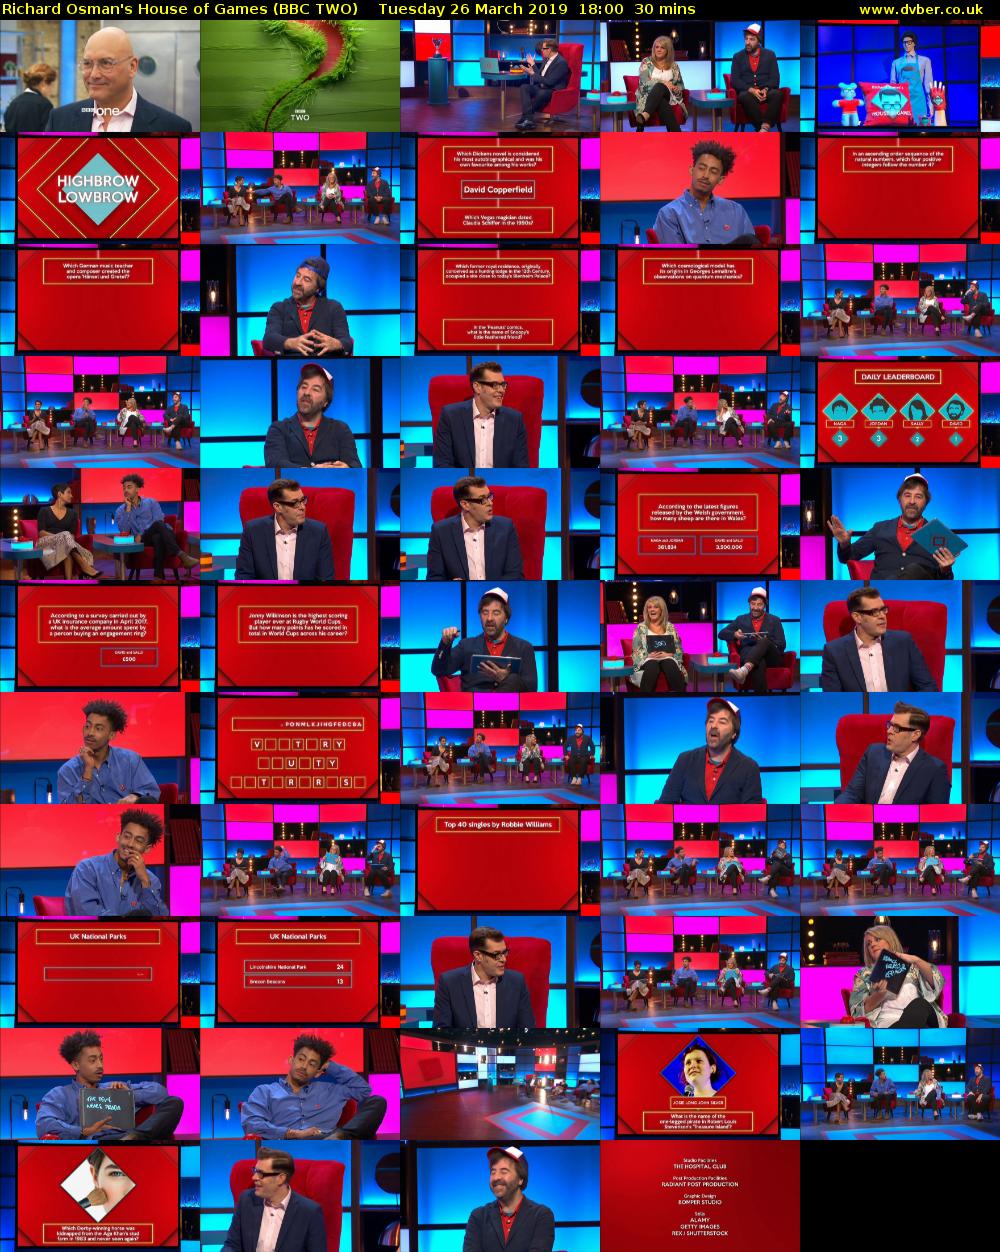 Richard Osman's House of Games (BBC TWO) Tuesday 26 March 2019 18:00 - 18:30